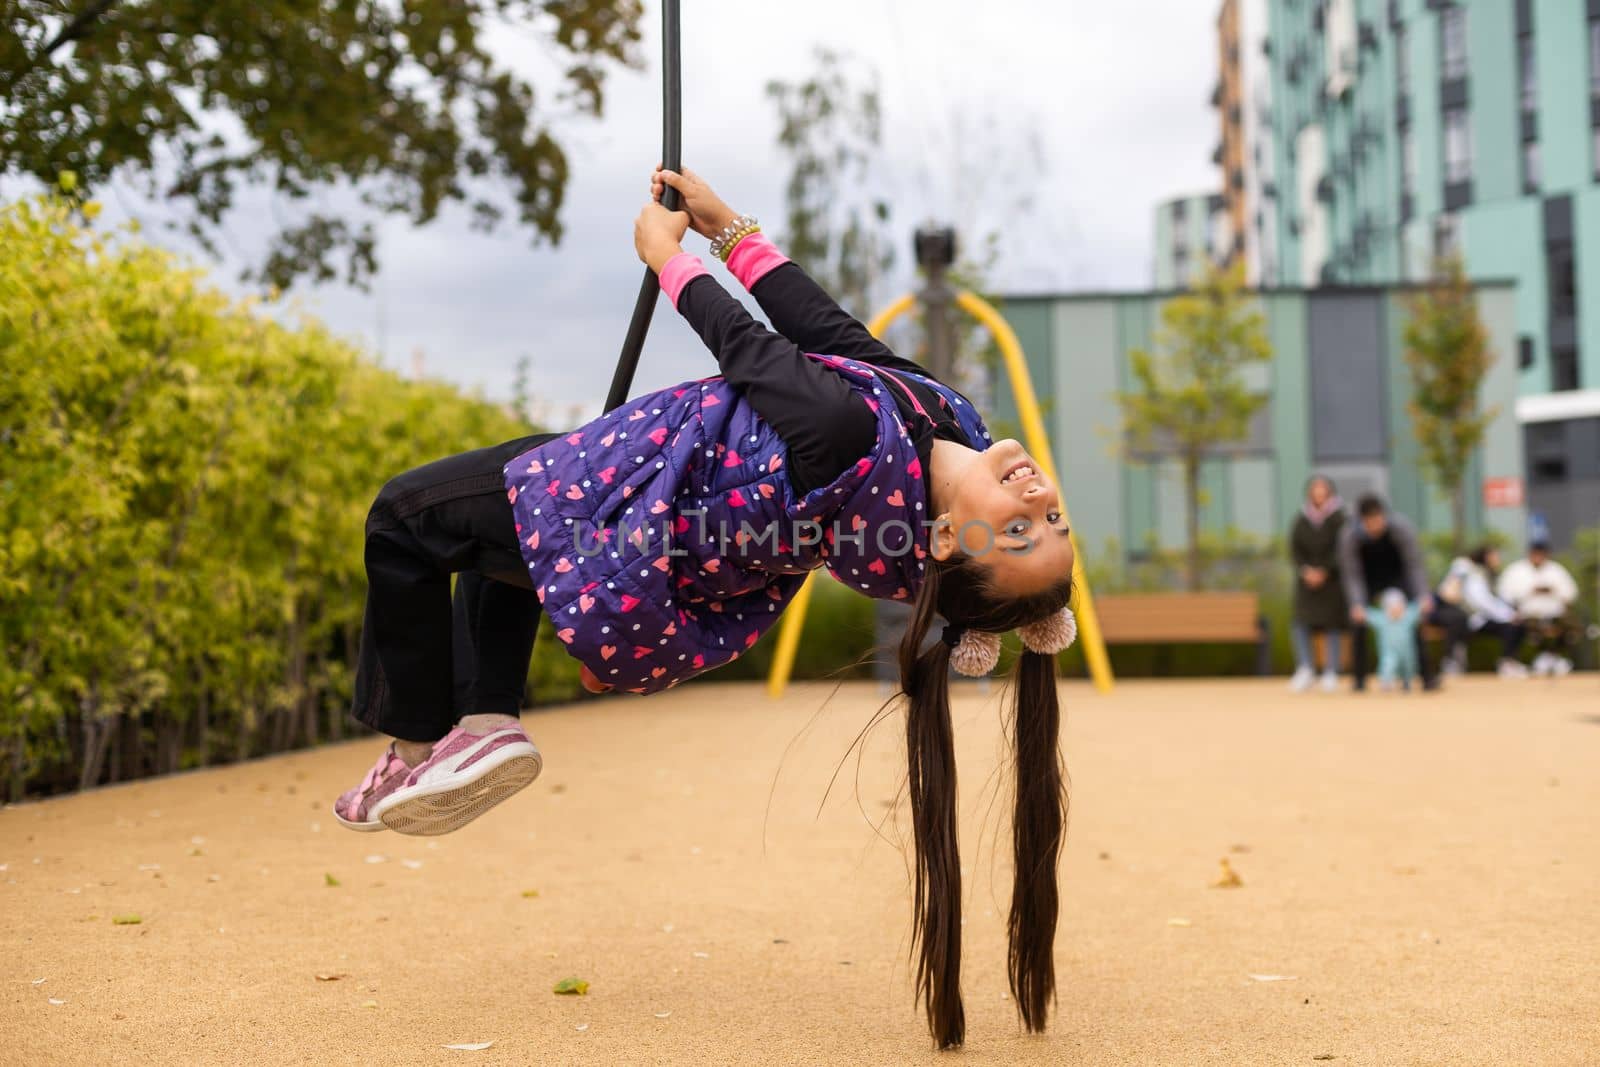 Smiling little girl swinging on a rope at a playground.